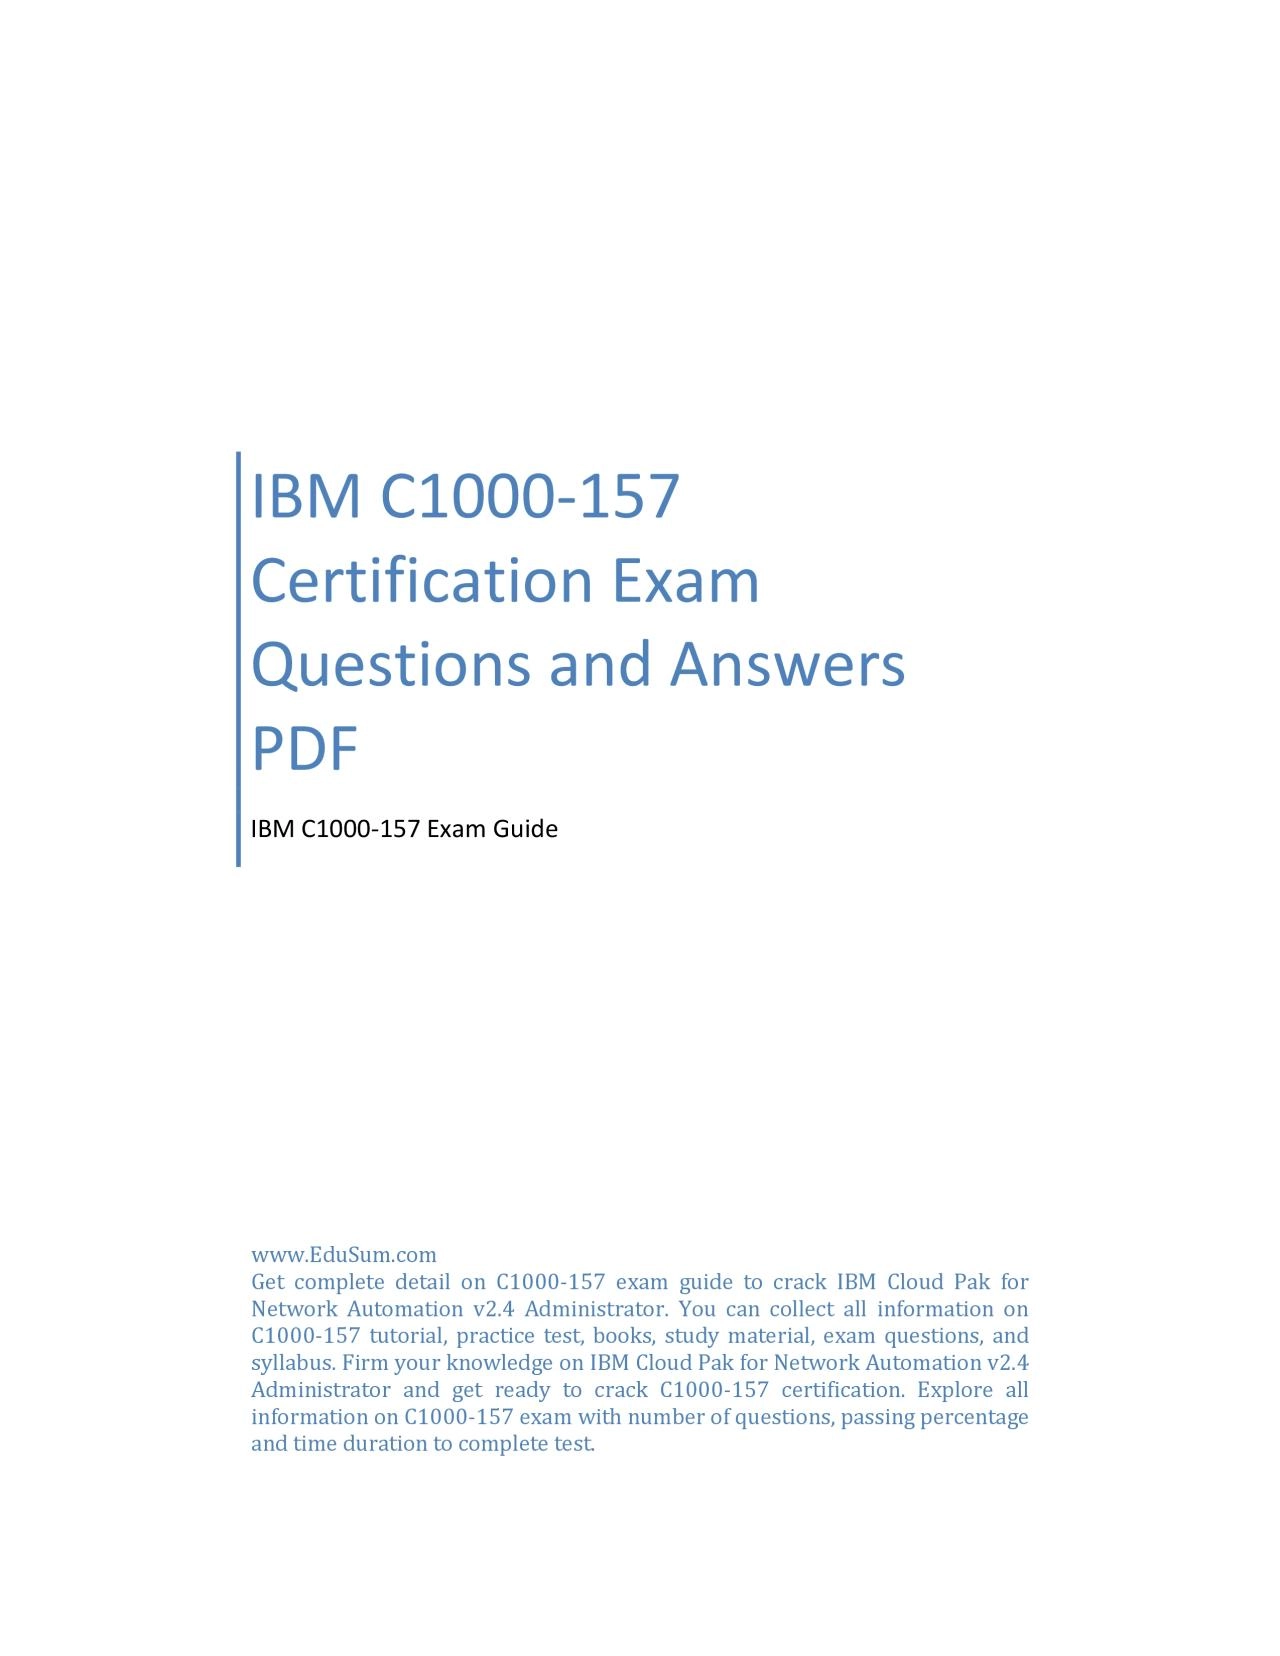 IBM C1000-157 Certification Exam Questions and Answers PDF